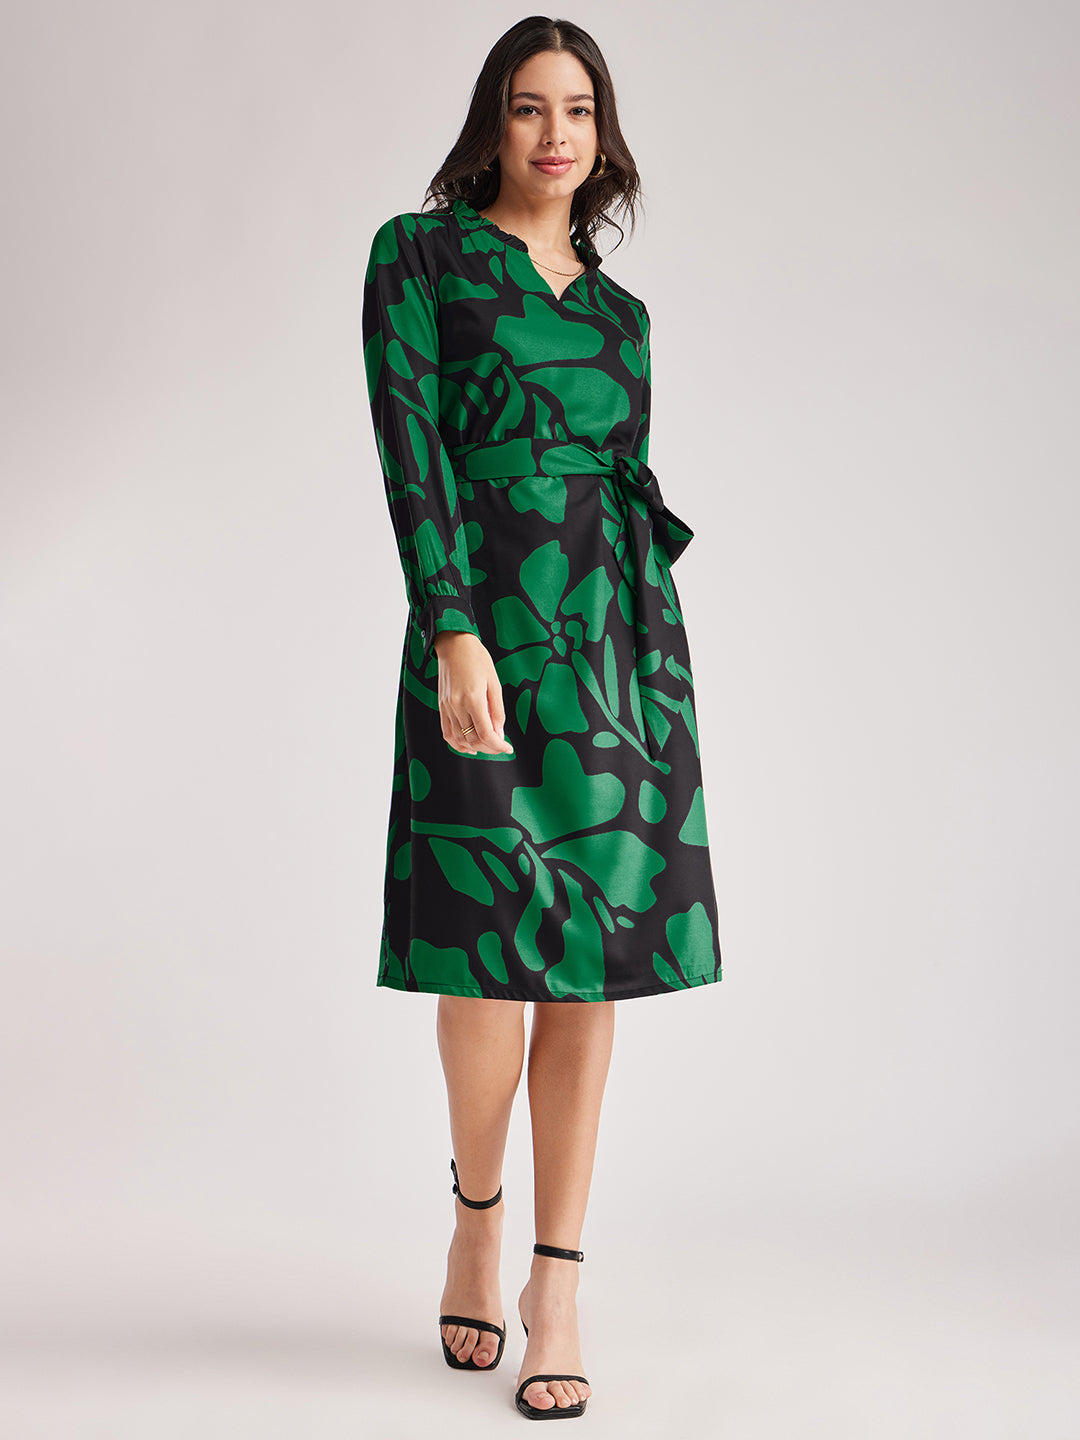 Ruffle Floral Dress - Black And Green